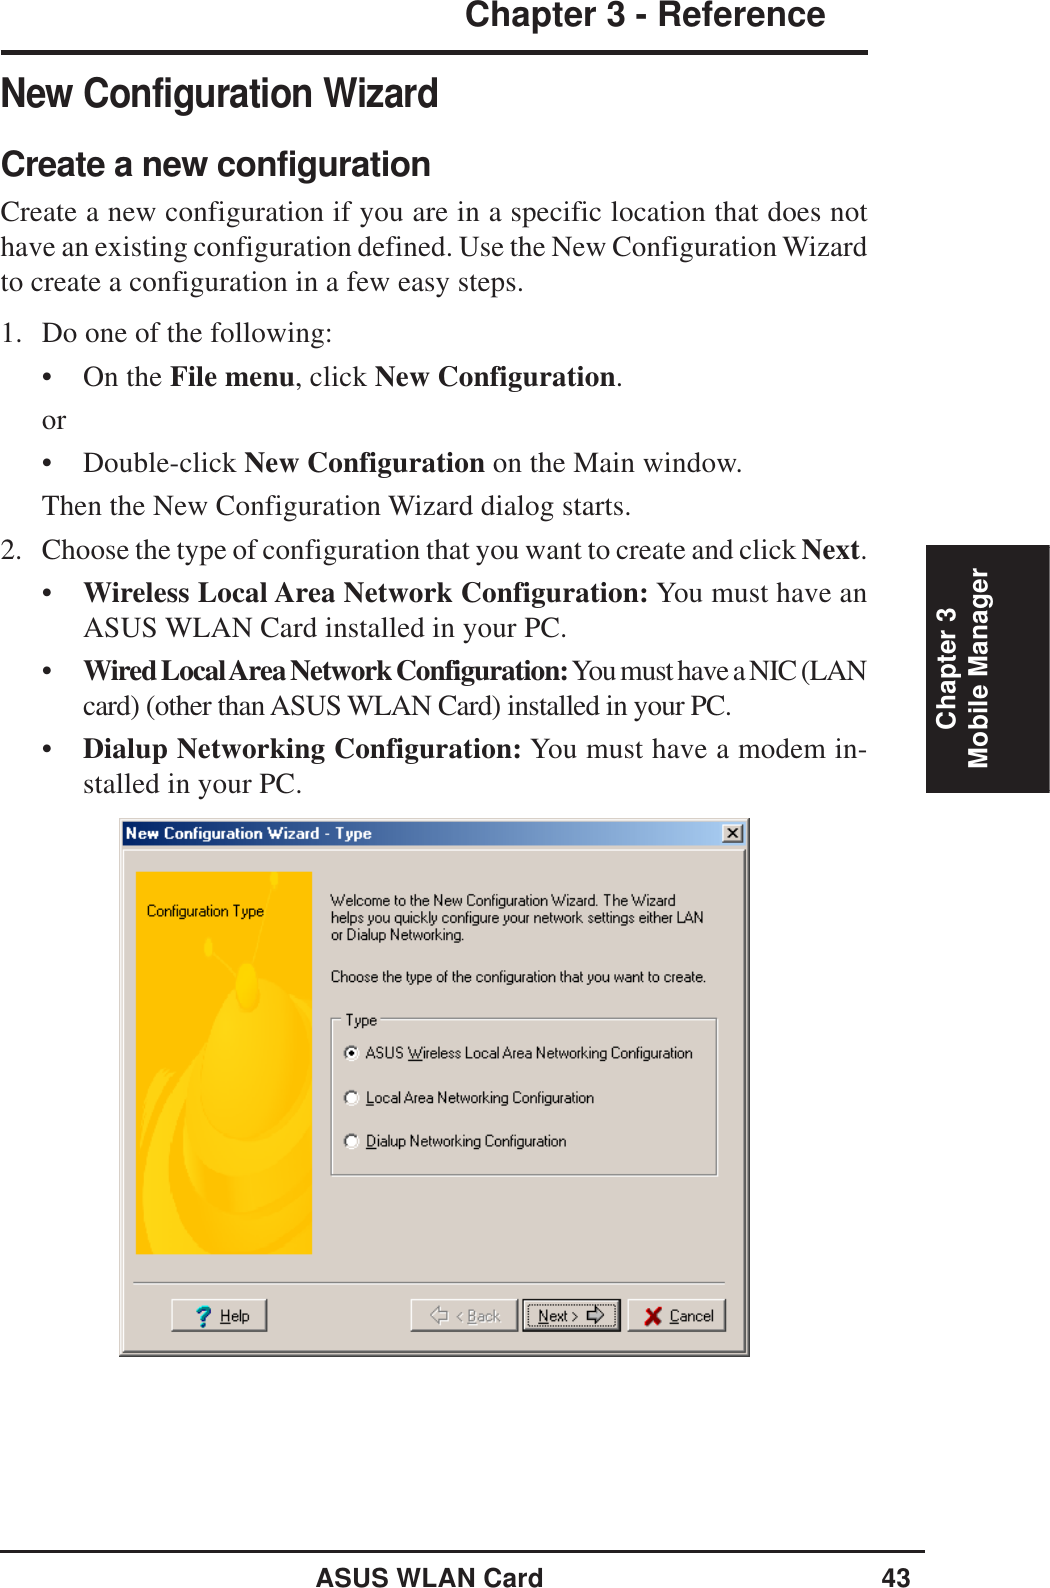 ASUS WLAN Card 43Chapter 3 - ReferenceChapter 3Mobile ManagerNew Configuration WizardCreate a new configurationCreate a new configuration if you are in a specific location that does nothave an existing configuration defined. Use the New Configuration Wizardto create a configuration in a few easy steps.1. Do one of the following:•On the File menu, click New Configuration.or• Double-click New Configuration on the Main window.Then the New Configuration Wizard dialog starts.2. Choose the type of configuration that you want to create and click Next.•Wireless Local Area Network Configuration: You must have anASUS WLAN Card installed in your PC.•Wired Local Area Network Configuration: You must have a NIC (LANcard) (other than ASUS WLAN Card) installed in your PC.•Dialup Networking Configuration: You must have a modem in-stalled in your PC.